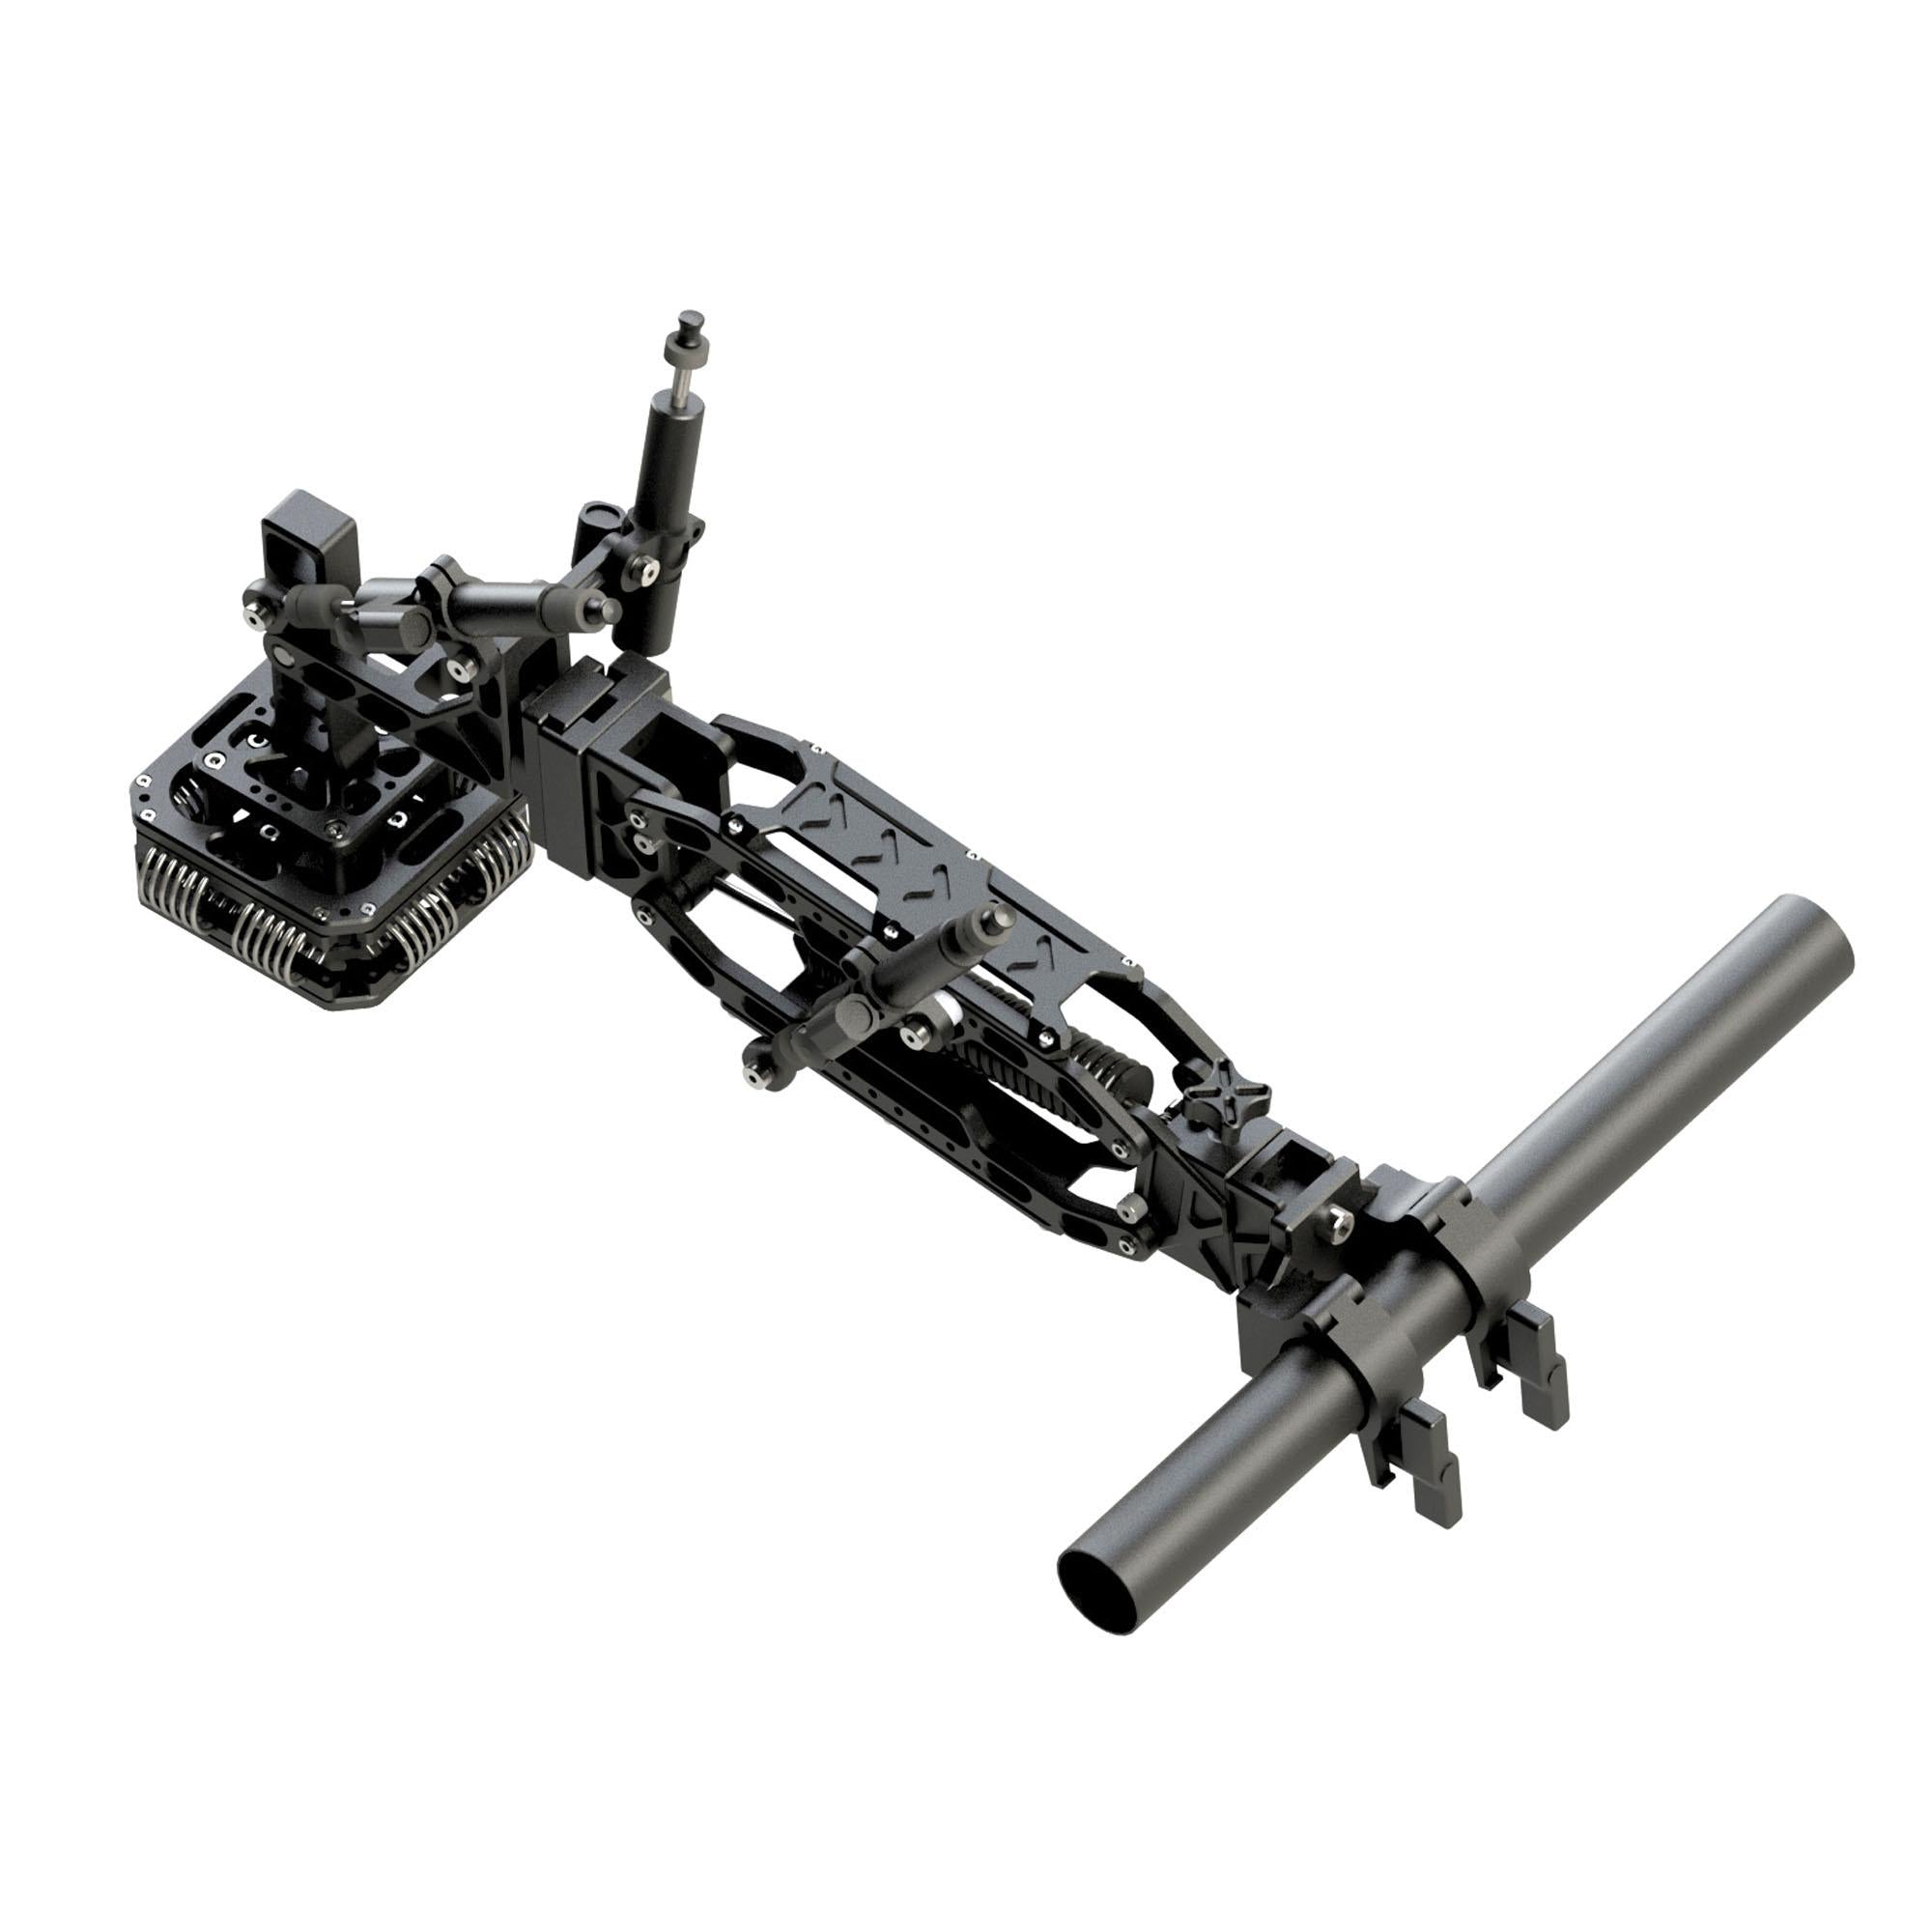 STEADYARM – SOLO Lightweight 6 Axis Shock Absorbing Stabilizer Full Kit